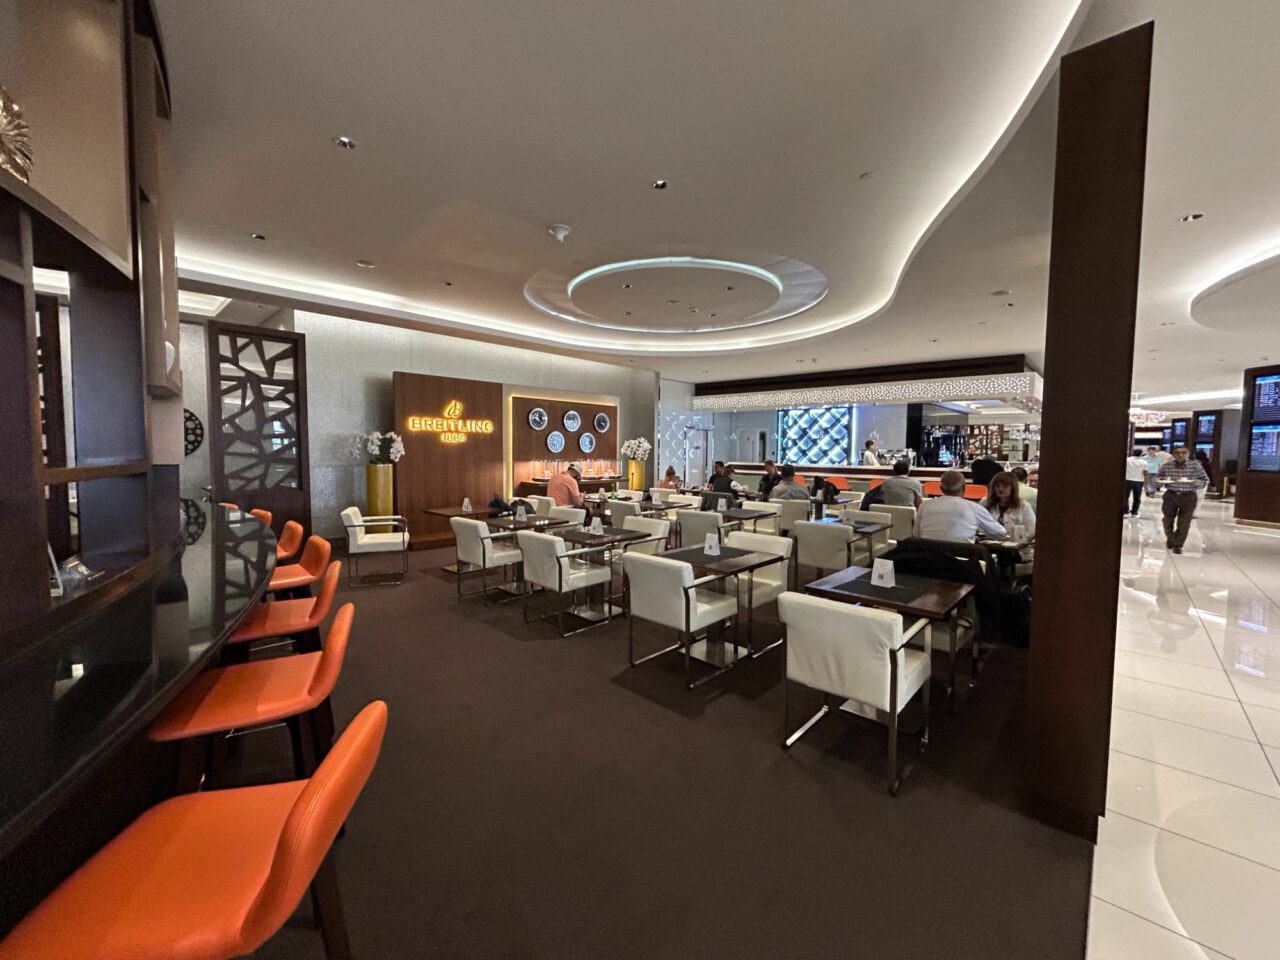 Second Dining Area of Etihad business class lounge in Abu Dhabi Terminal 3 